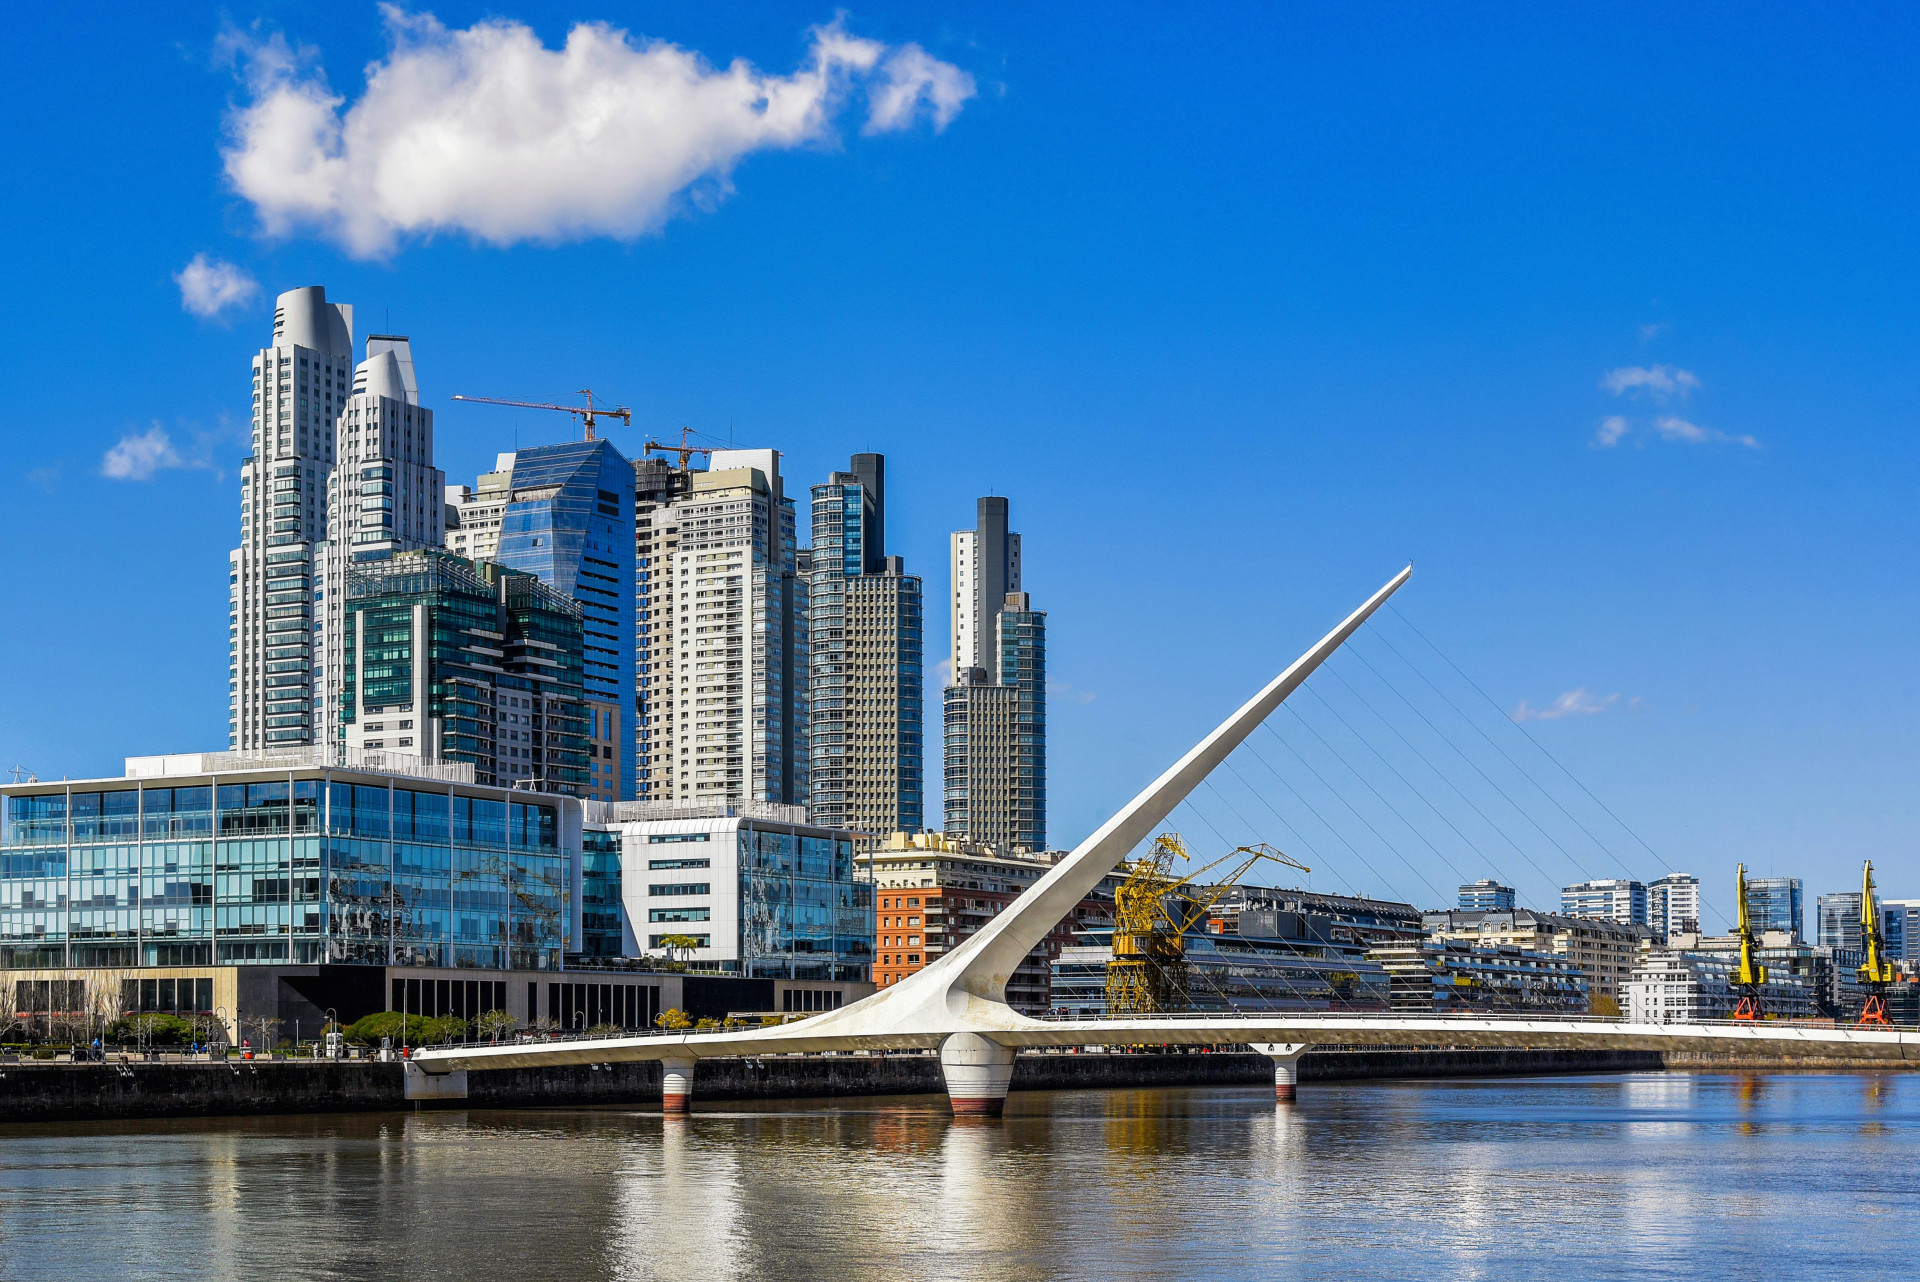 Nearby is the charming Puerto Madero neighborhood, which is home to the famous Puente de La Mujer bridge, designed by Spanish architect Santiago Calatrava. It is definitely worth seeing!<p>You may also like:<a href="https://www.starsinsider.com/n/331668?utm_source=msn.com&utm_medium=display&utm_campaign=referral_description&utm_content=208346v2en-sg"> Stinky stars: celebs with questionable personal hygiene</a></p>